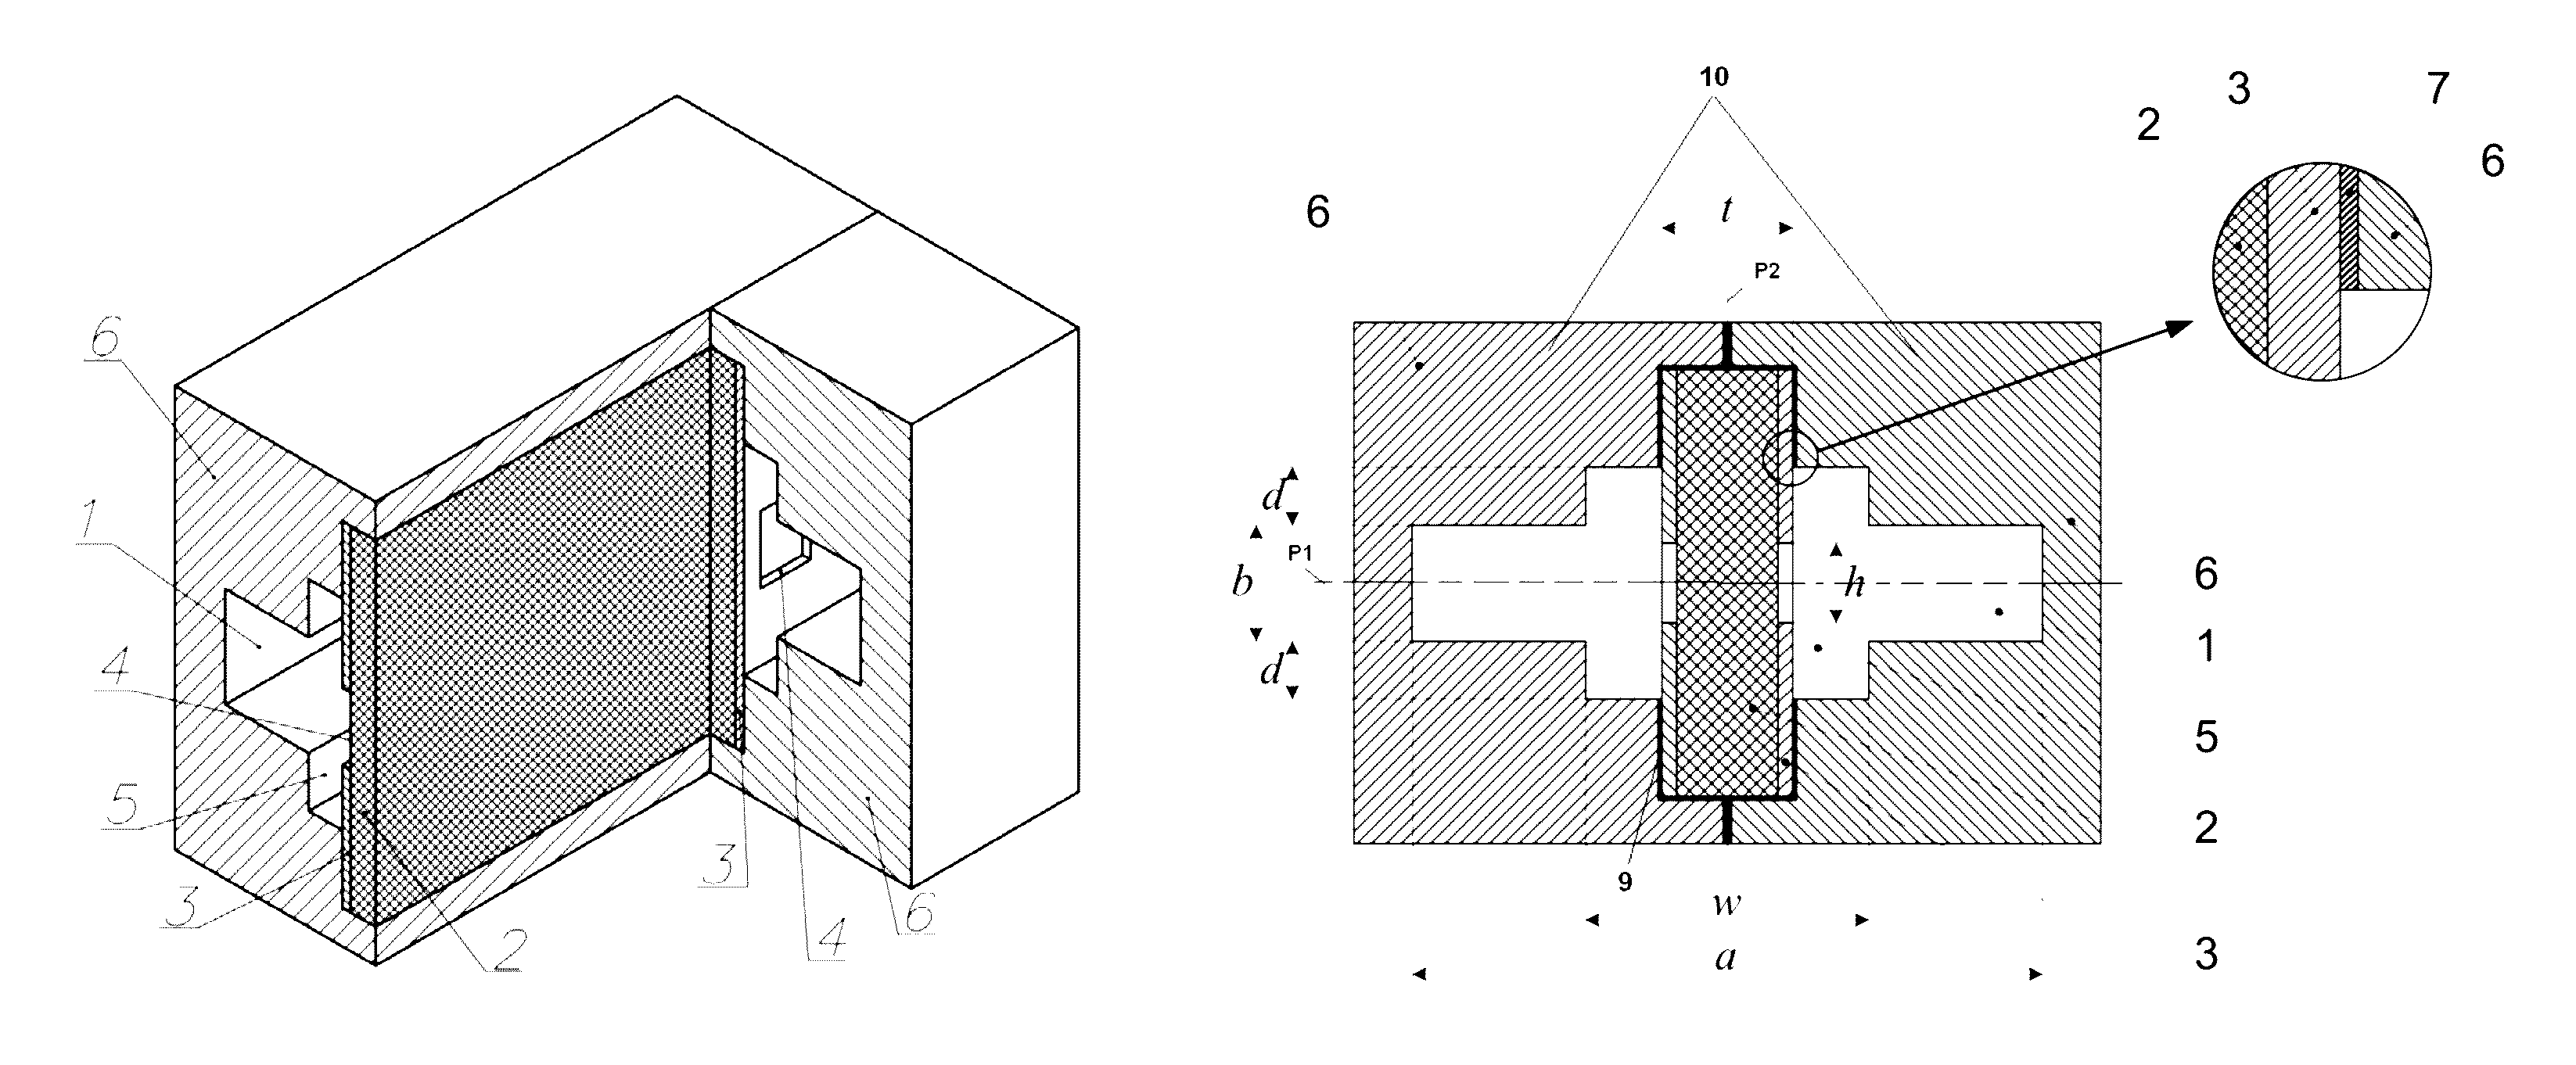 Rectangular band-pass filter having recesses of less than one-quarter wavelength depth formed therein for fitting a dielectric insert with a superconductive film within the recesses